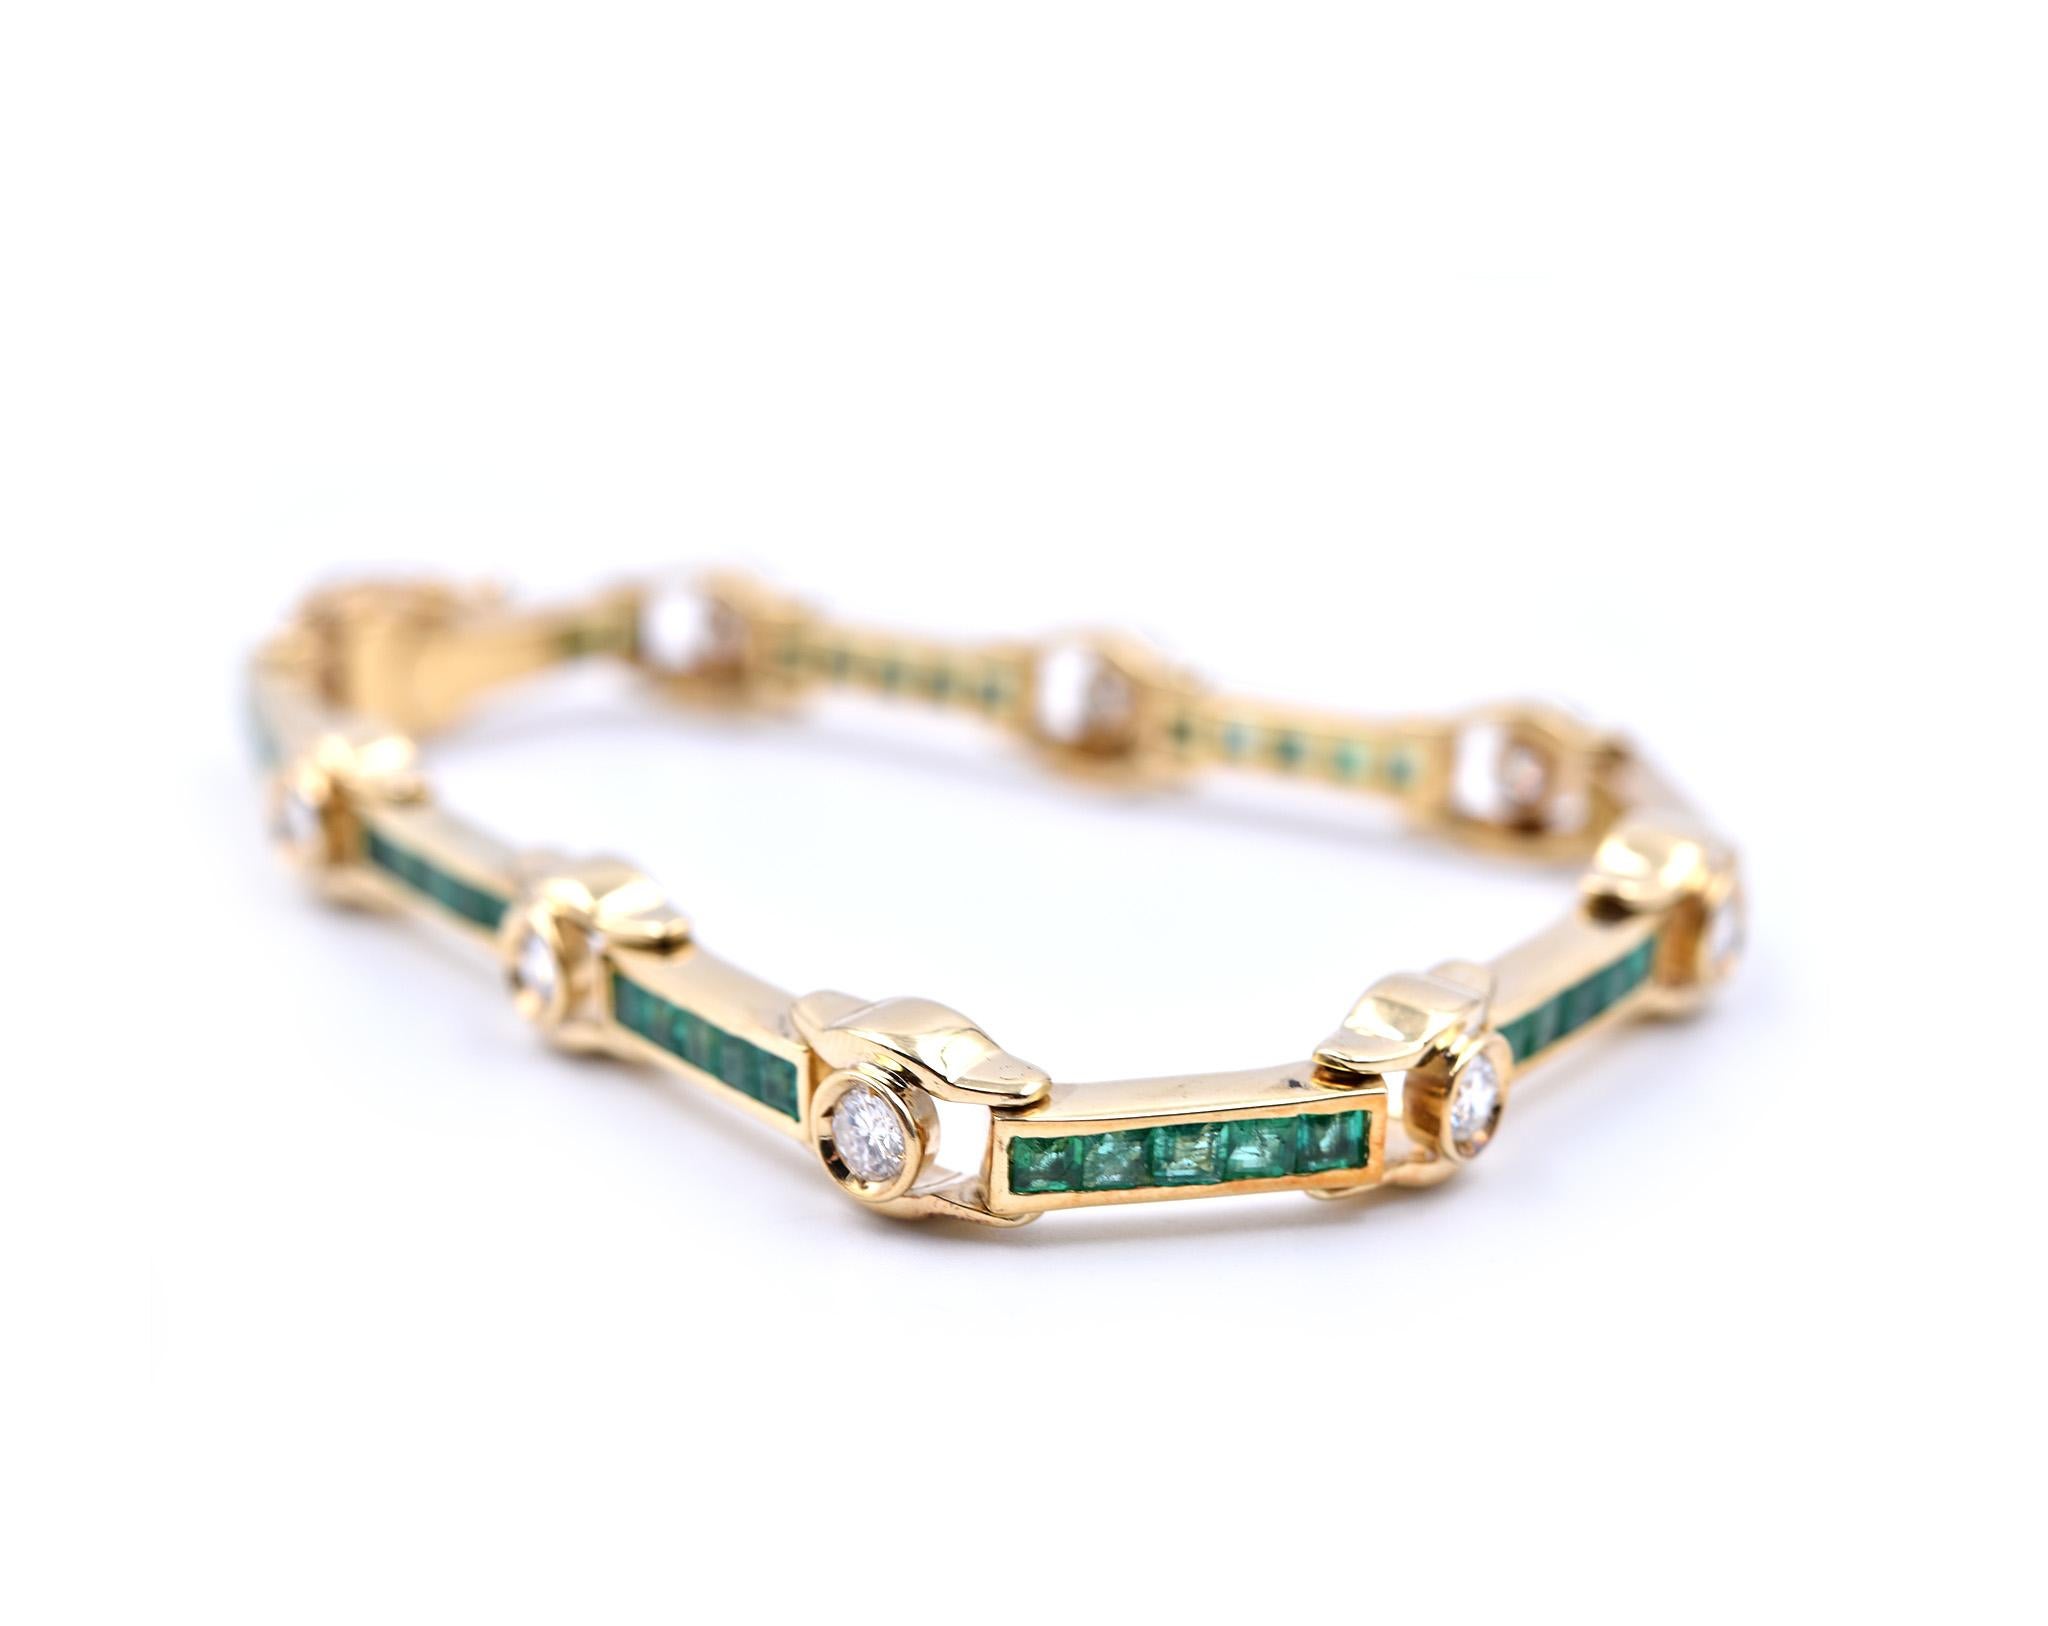 Designer: custom design
Material: 18k white gold
Emerald: 45 emeralds= 2.70cttw
Diamonds: 9 round brilliant= 1.80cttw
Color: G
Clarity: VS
Dimensions: bracelet is approximately 7 ¼-inch long and 7.52mm wide
Weight:  31 grams
